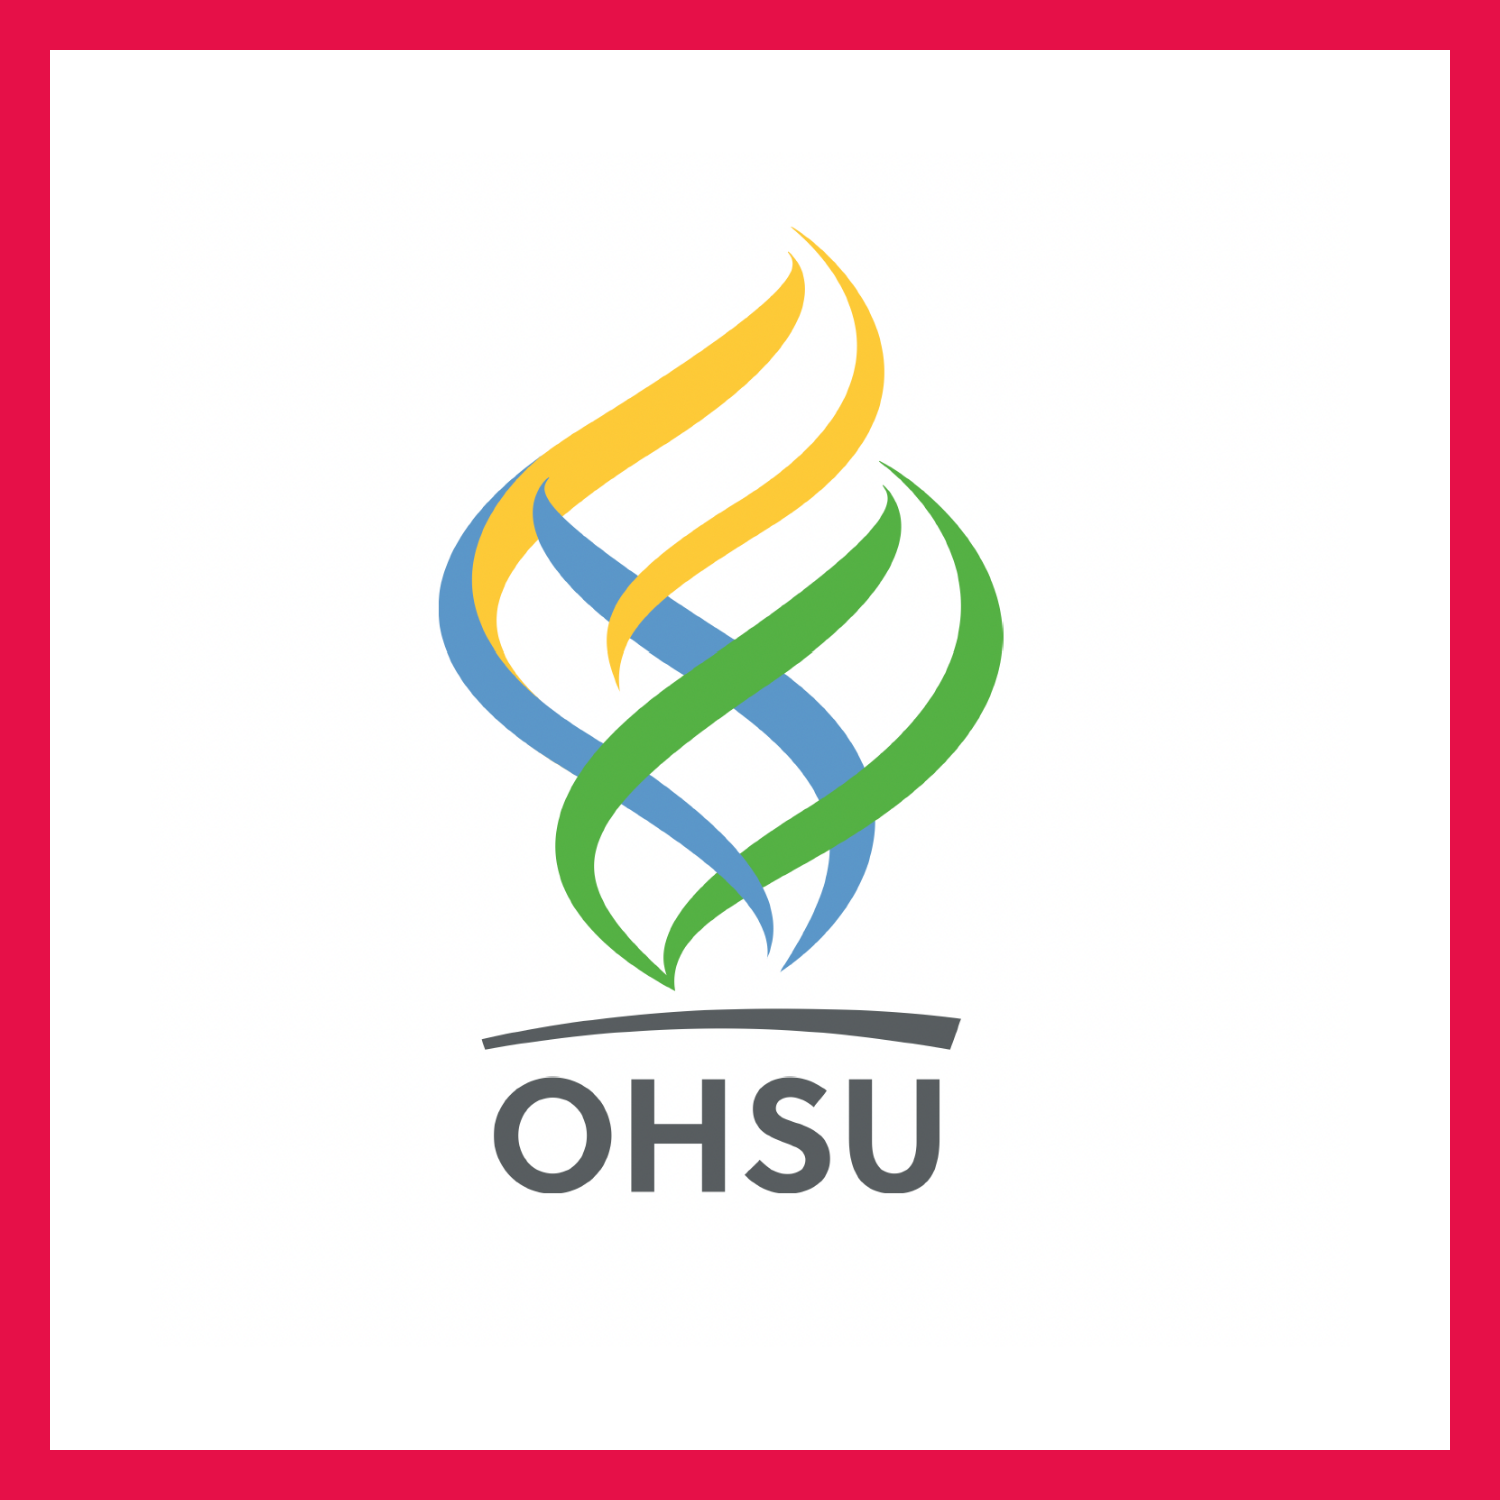 OSHU Logo with yellow, green, and blue swirls above the text.